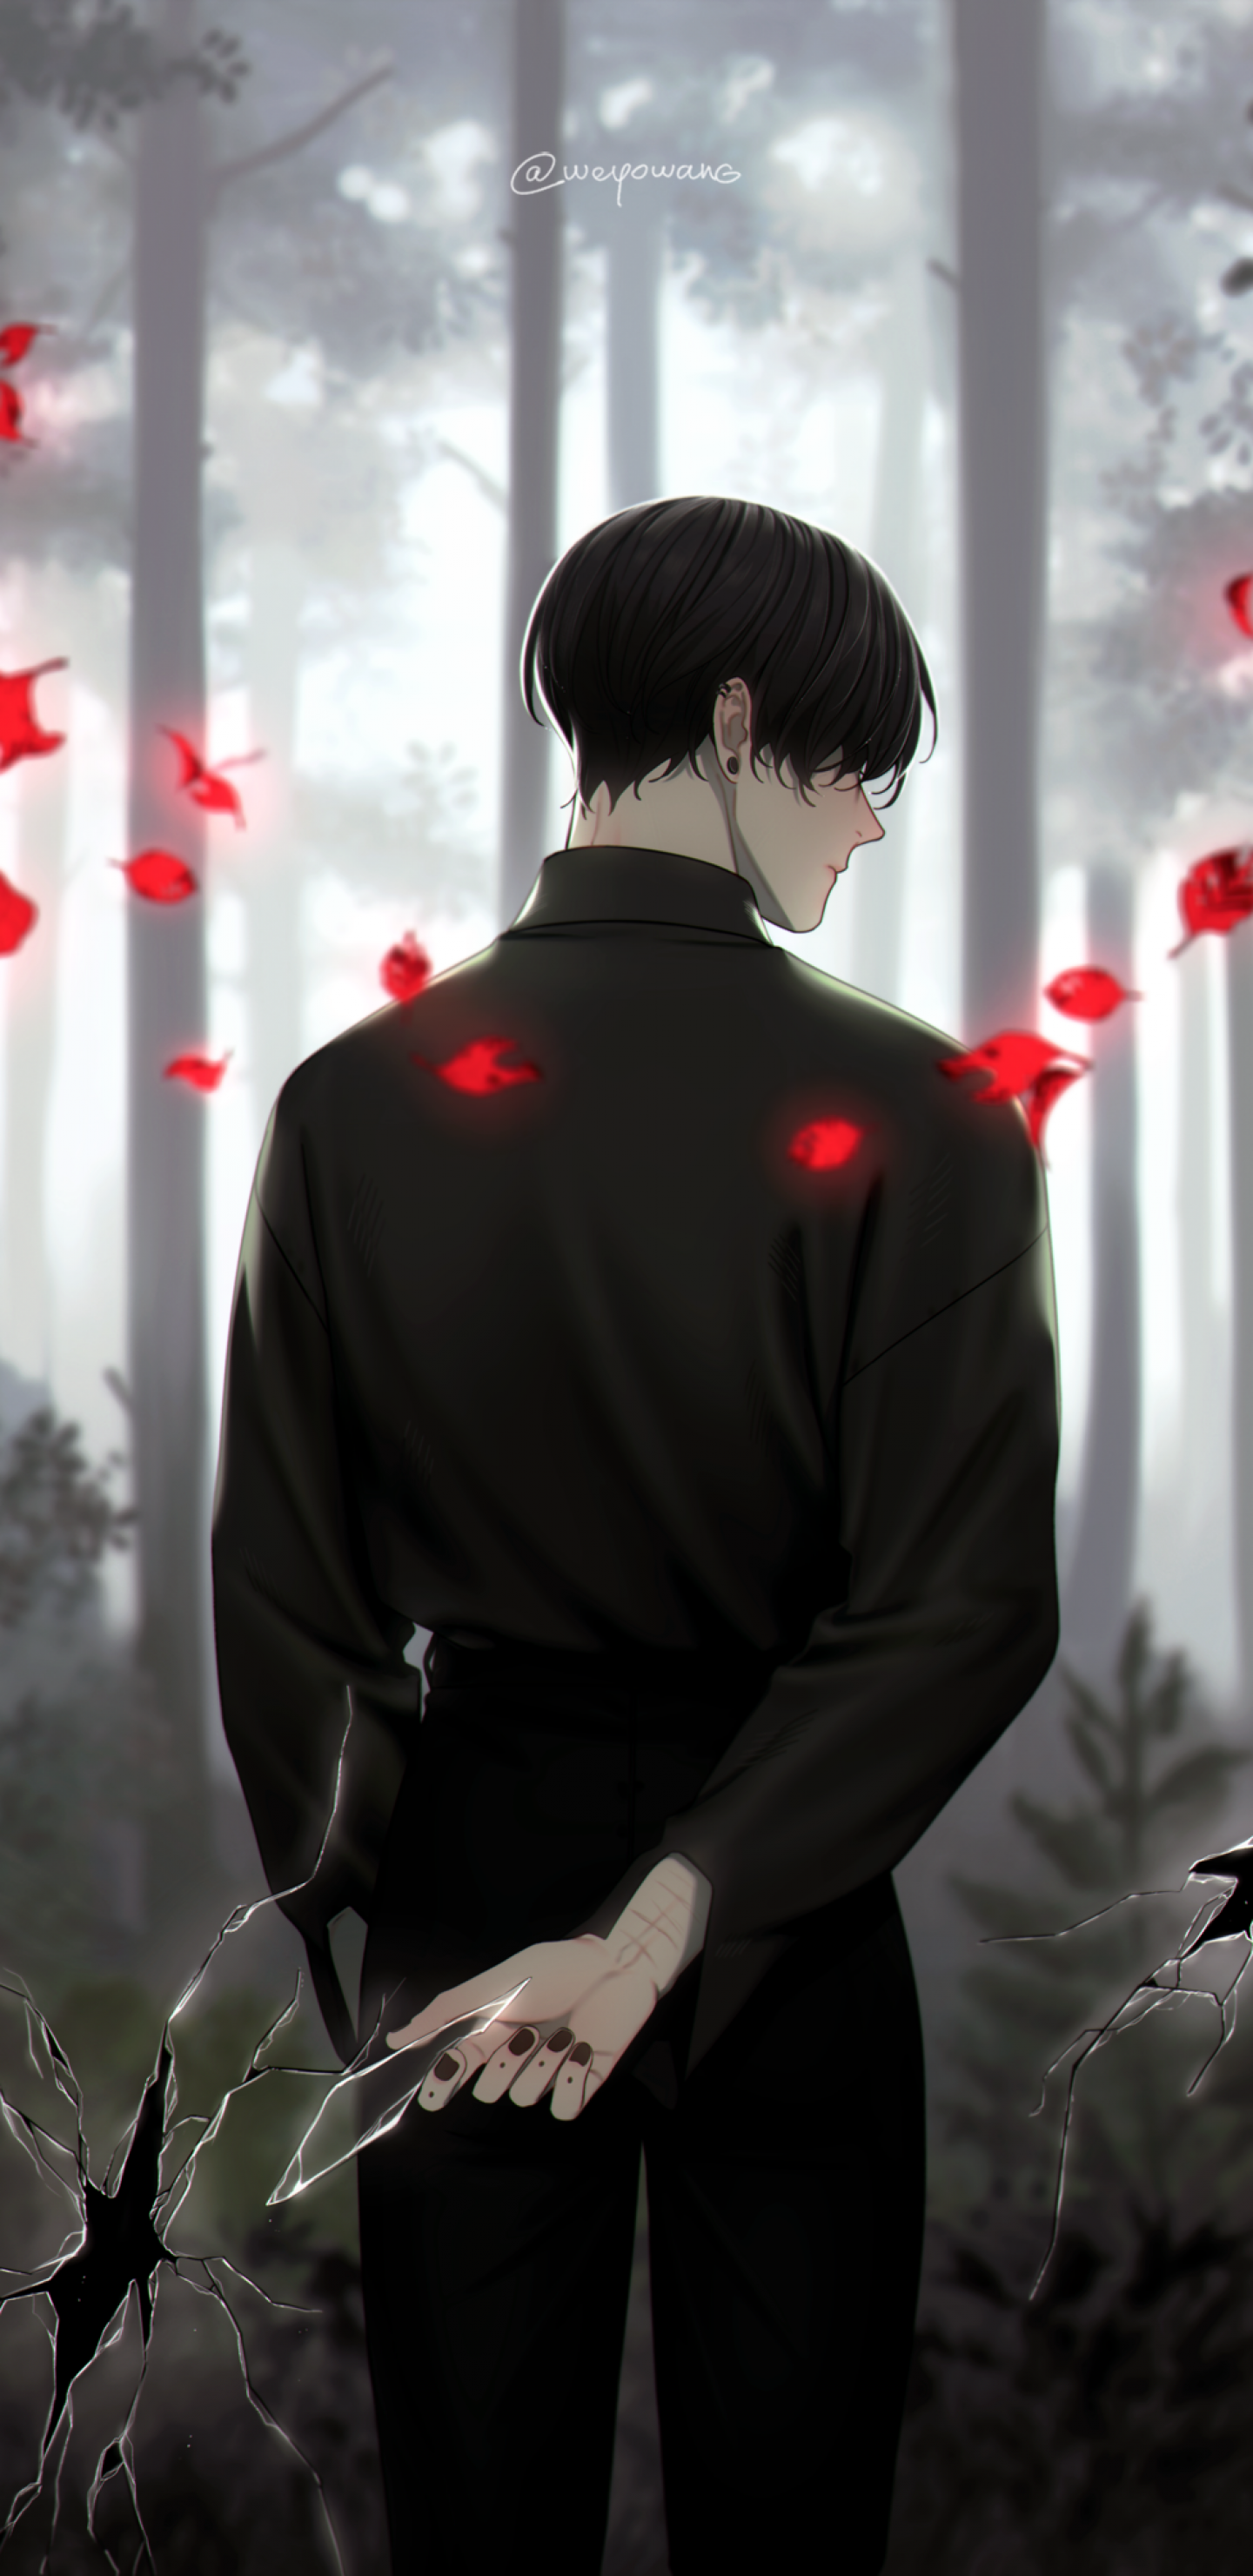 Download 1440x2960 Anime Man, Back View, Shattered Glass, Earring